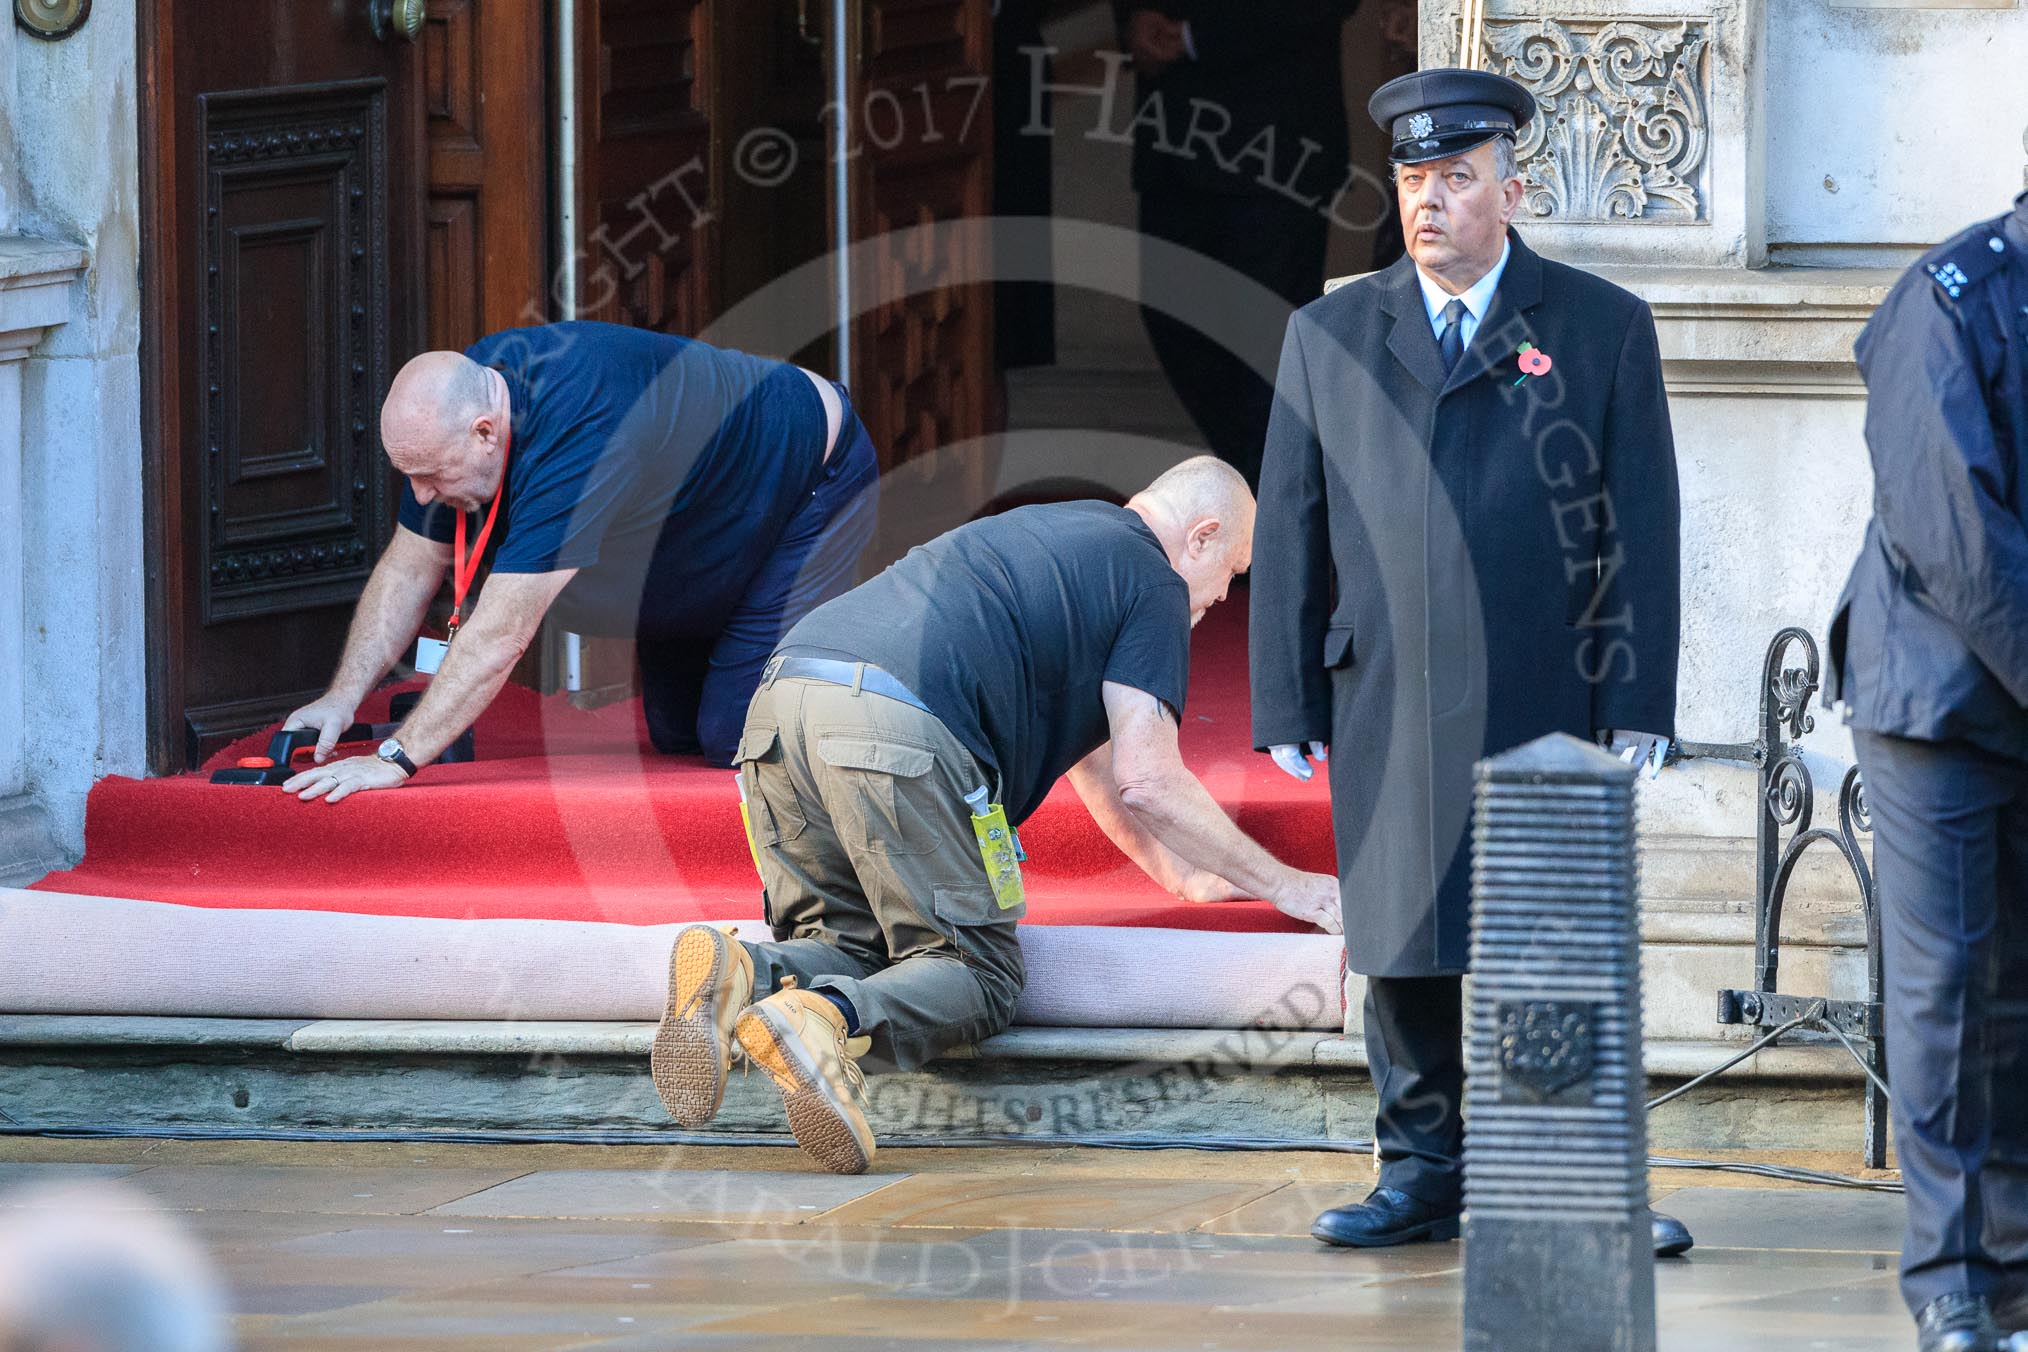 Rge red carpet is rolled out at the entrance of the Foreign and Commonwealth Office before the Remembrance Sunday Cenotaph Ceremony 2018 at Horse Guards Parade, Westminster, London, 11 November 2018, 09:40.